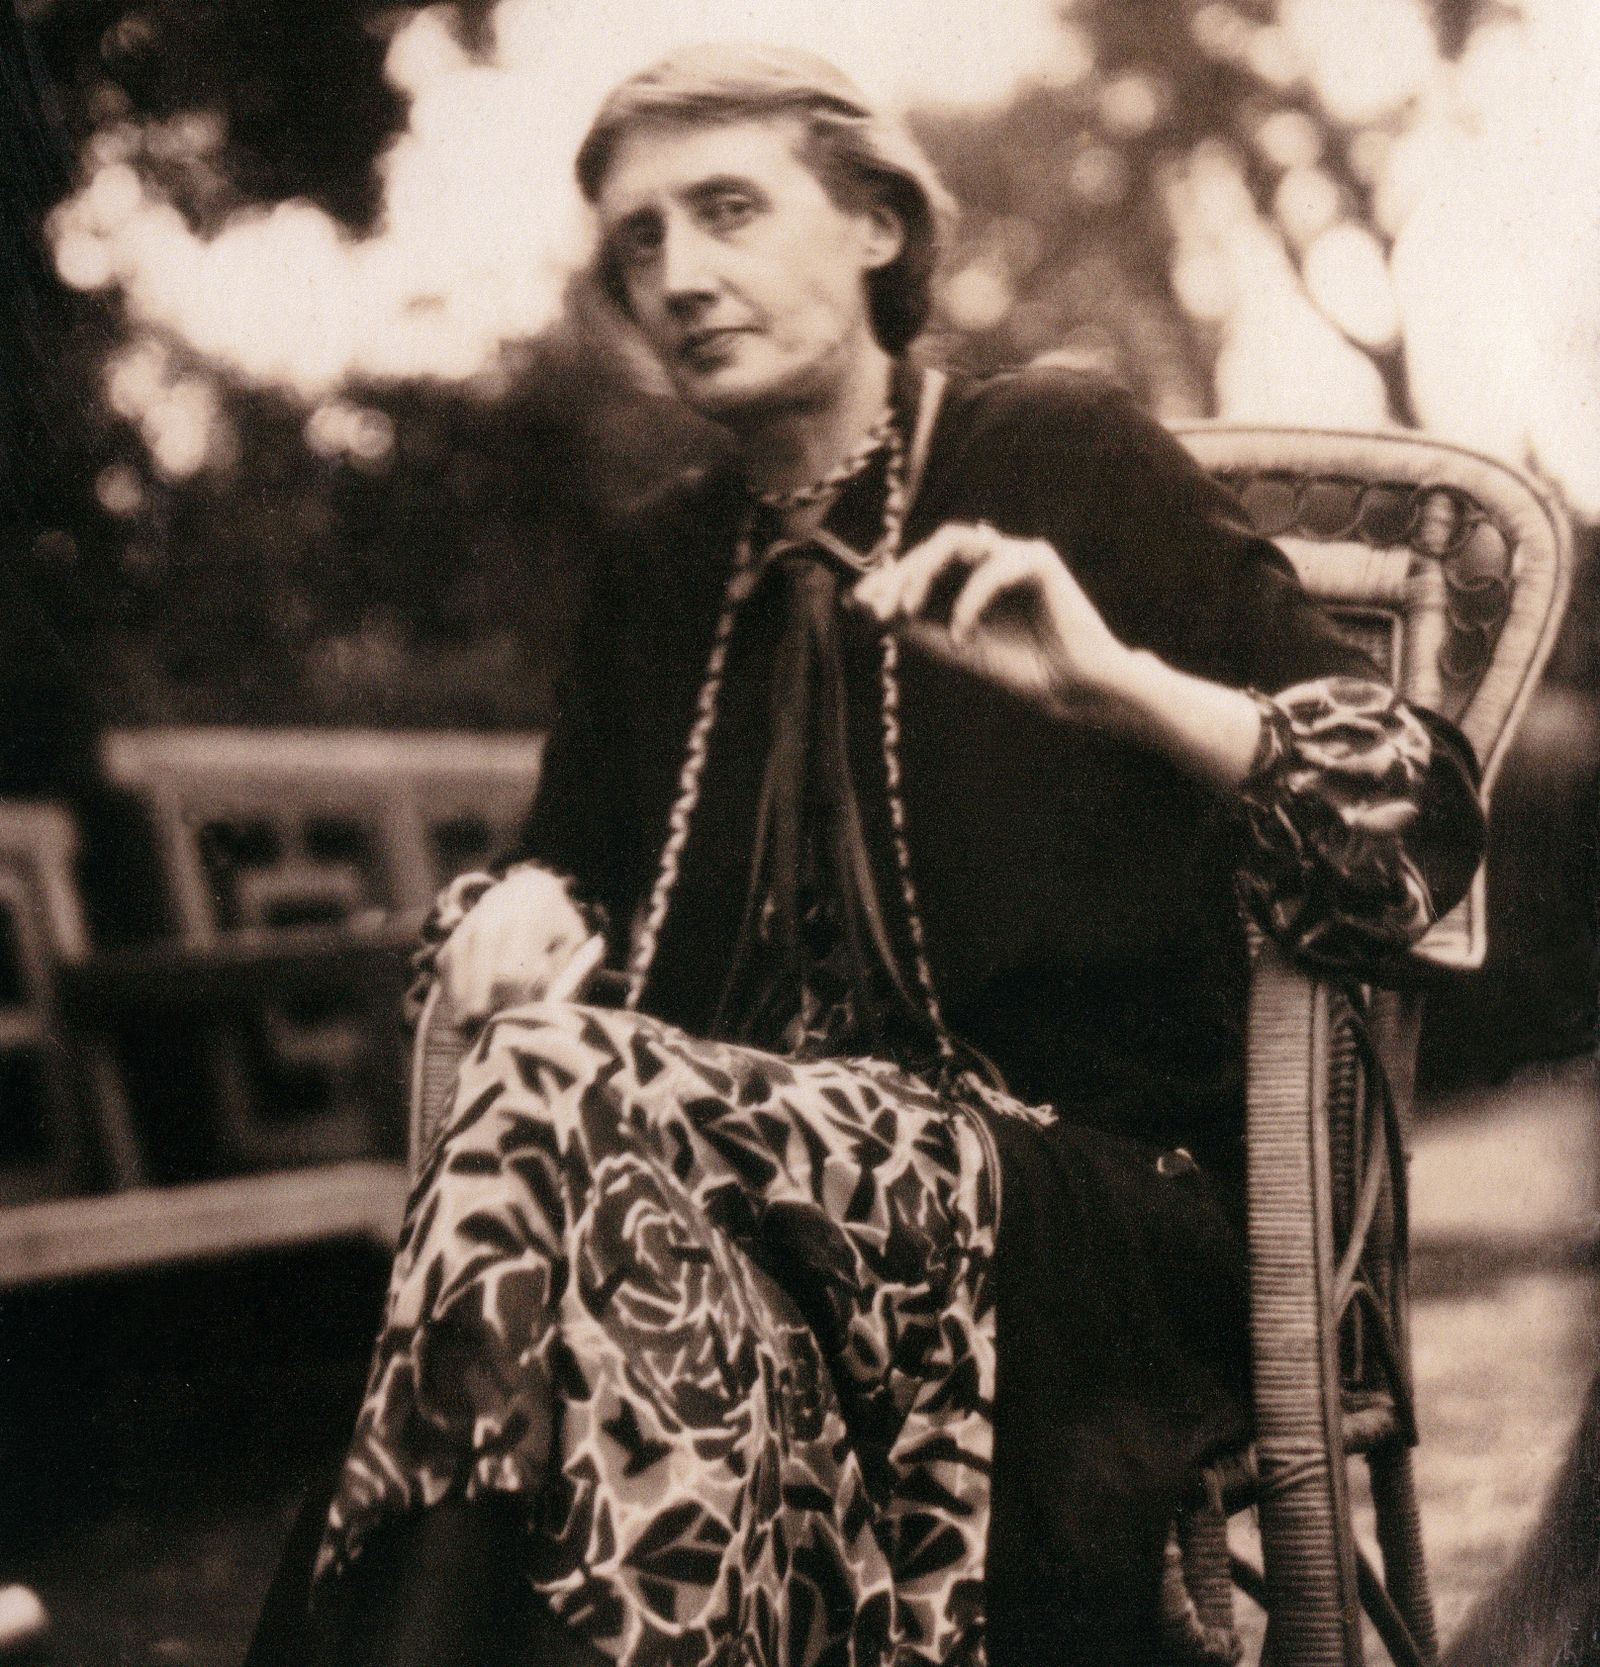 Virginia Woolf Scorned Fashion but Couldn't Escape It, Smart News